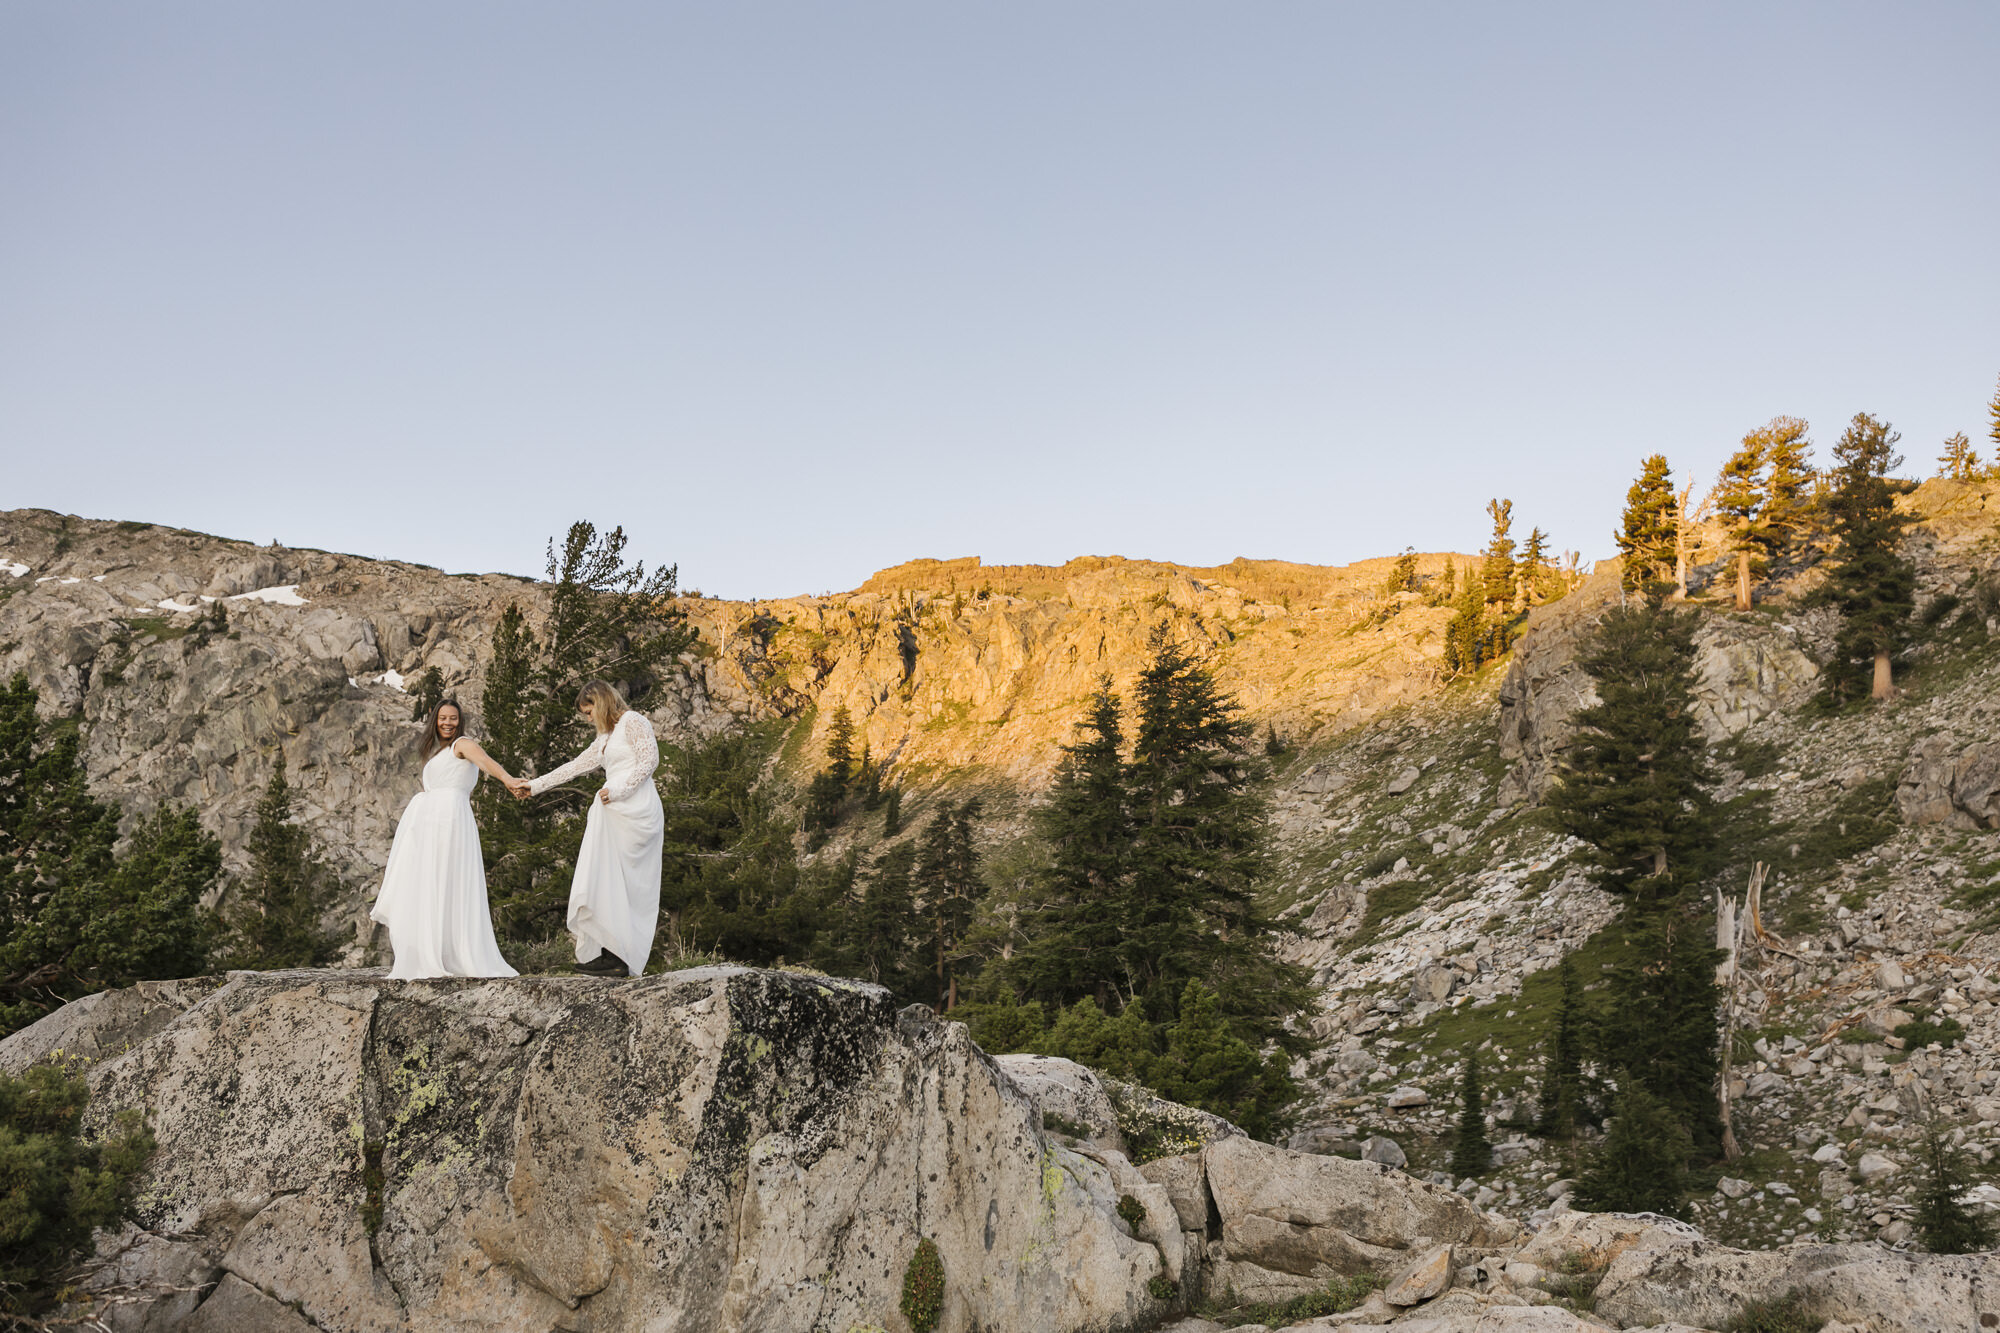 Lesbian wedding couple hold hands at sunrise during their mountain elopement